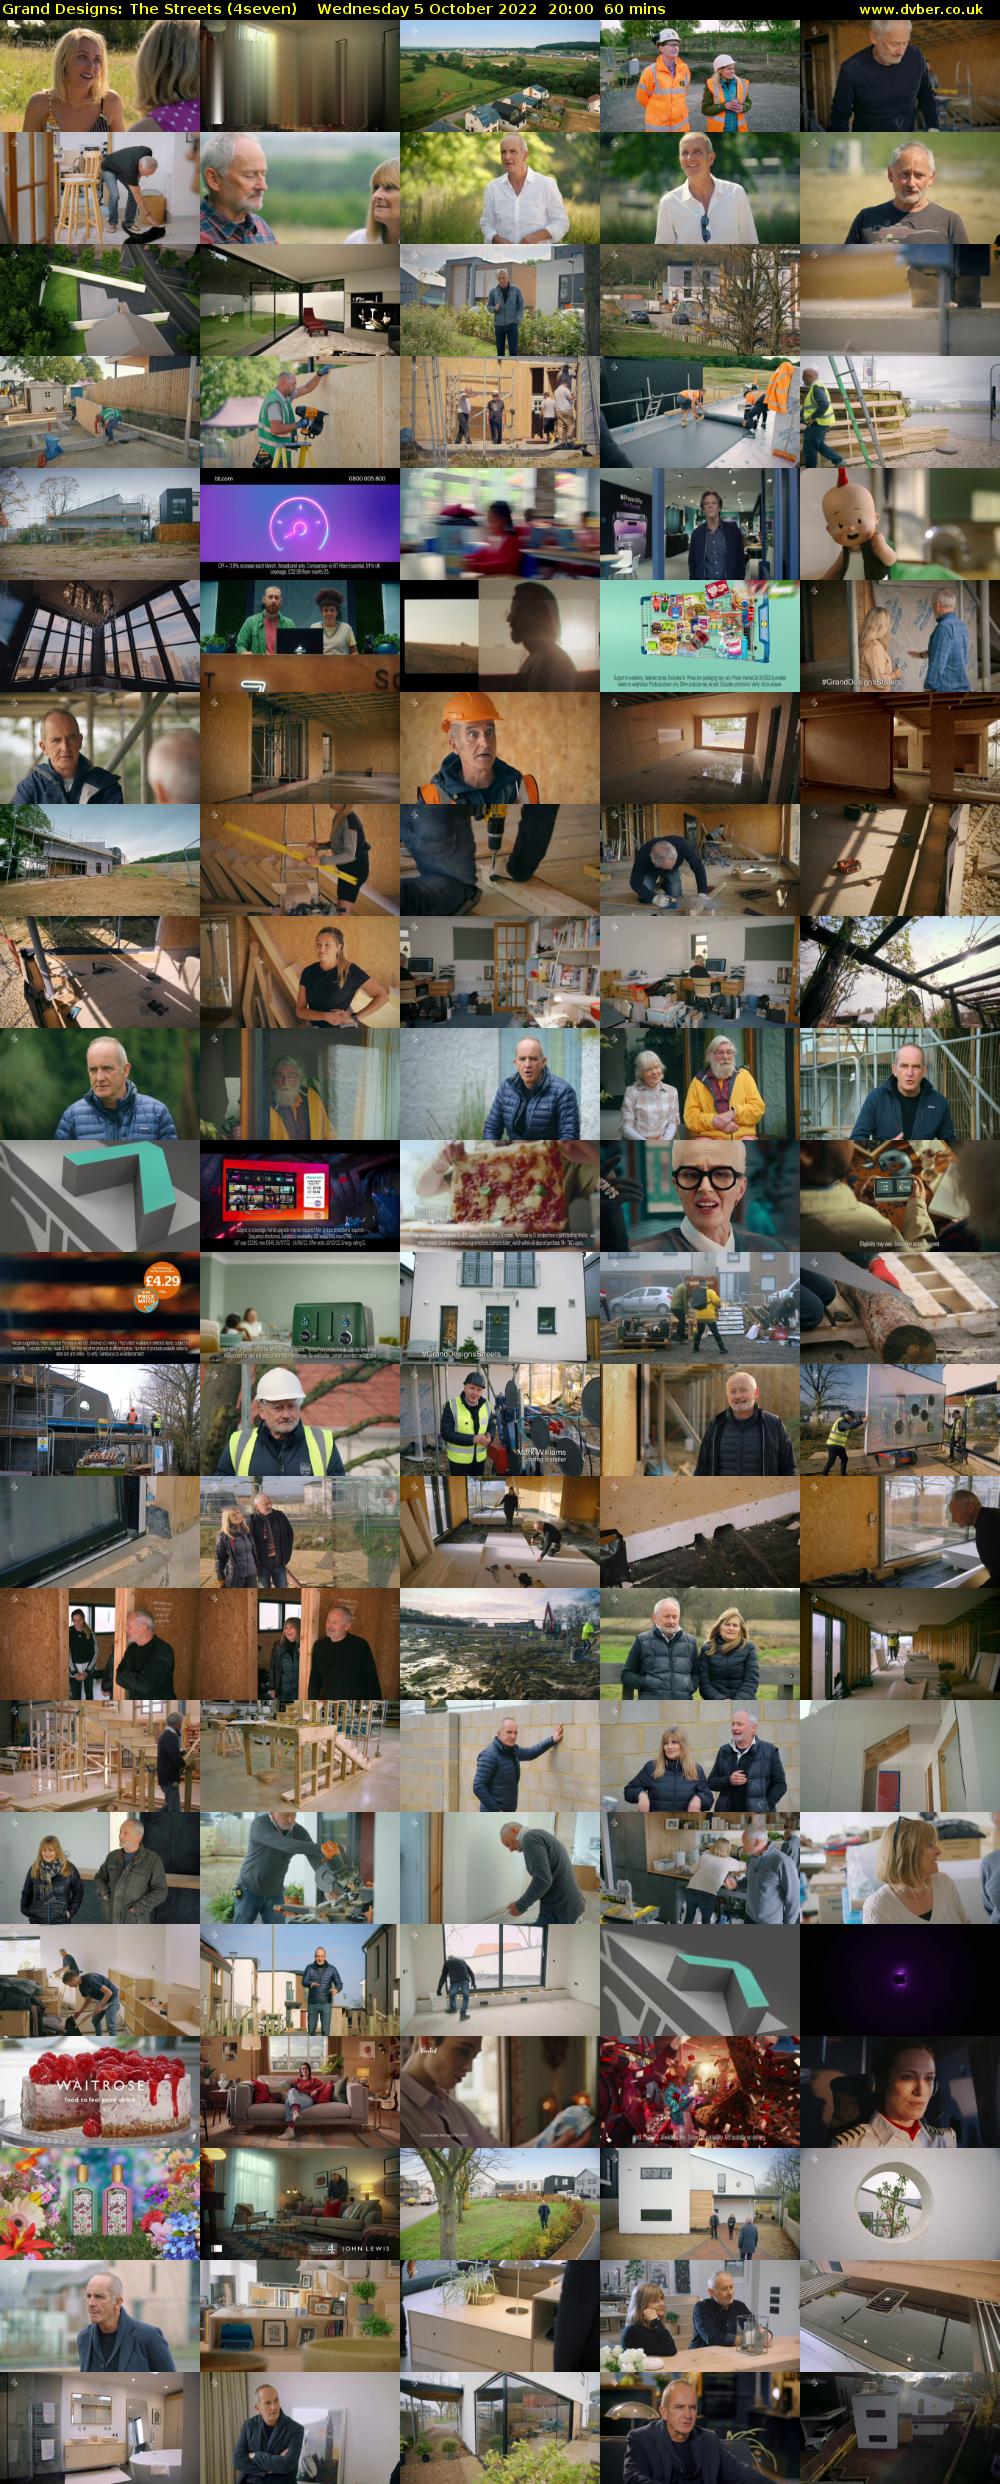 Grand Designs: The Streets (4seven) Wednesday 5 October 2022 20:00 - 21:00